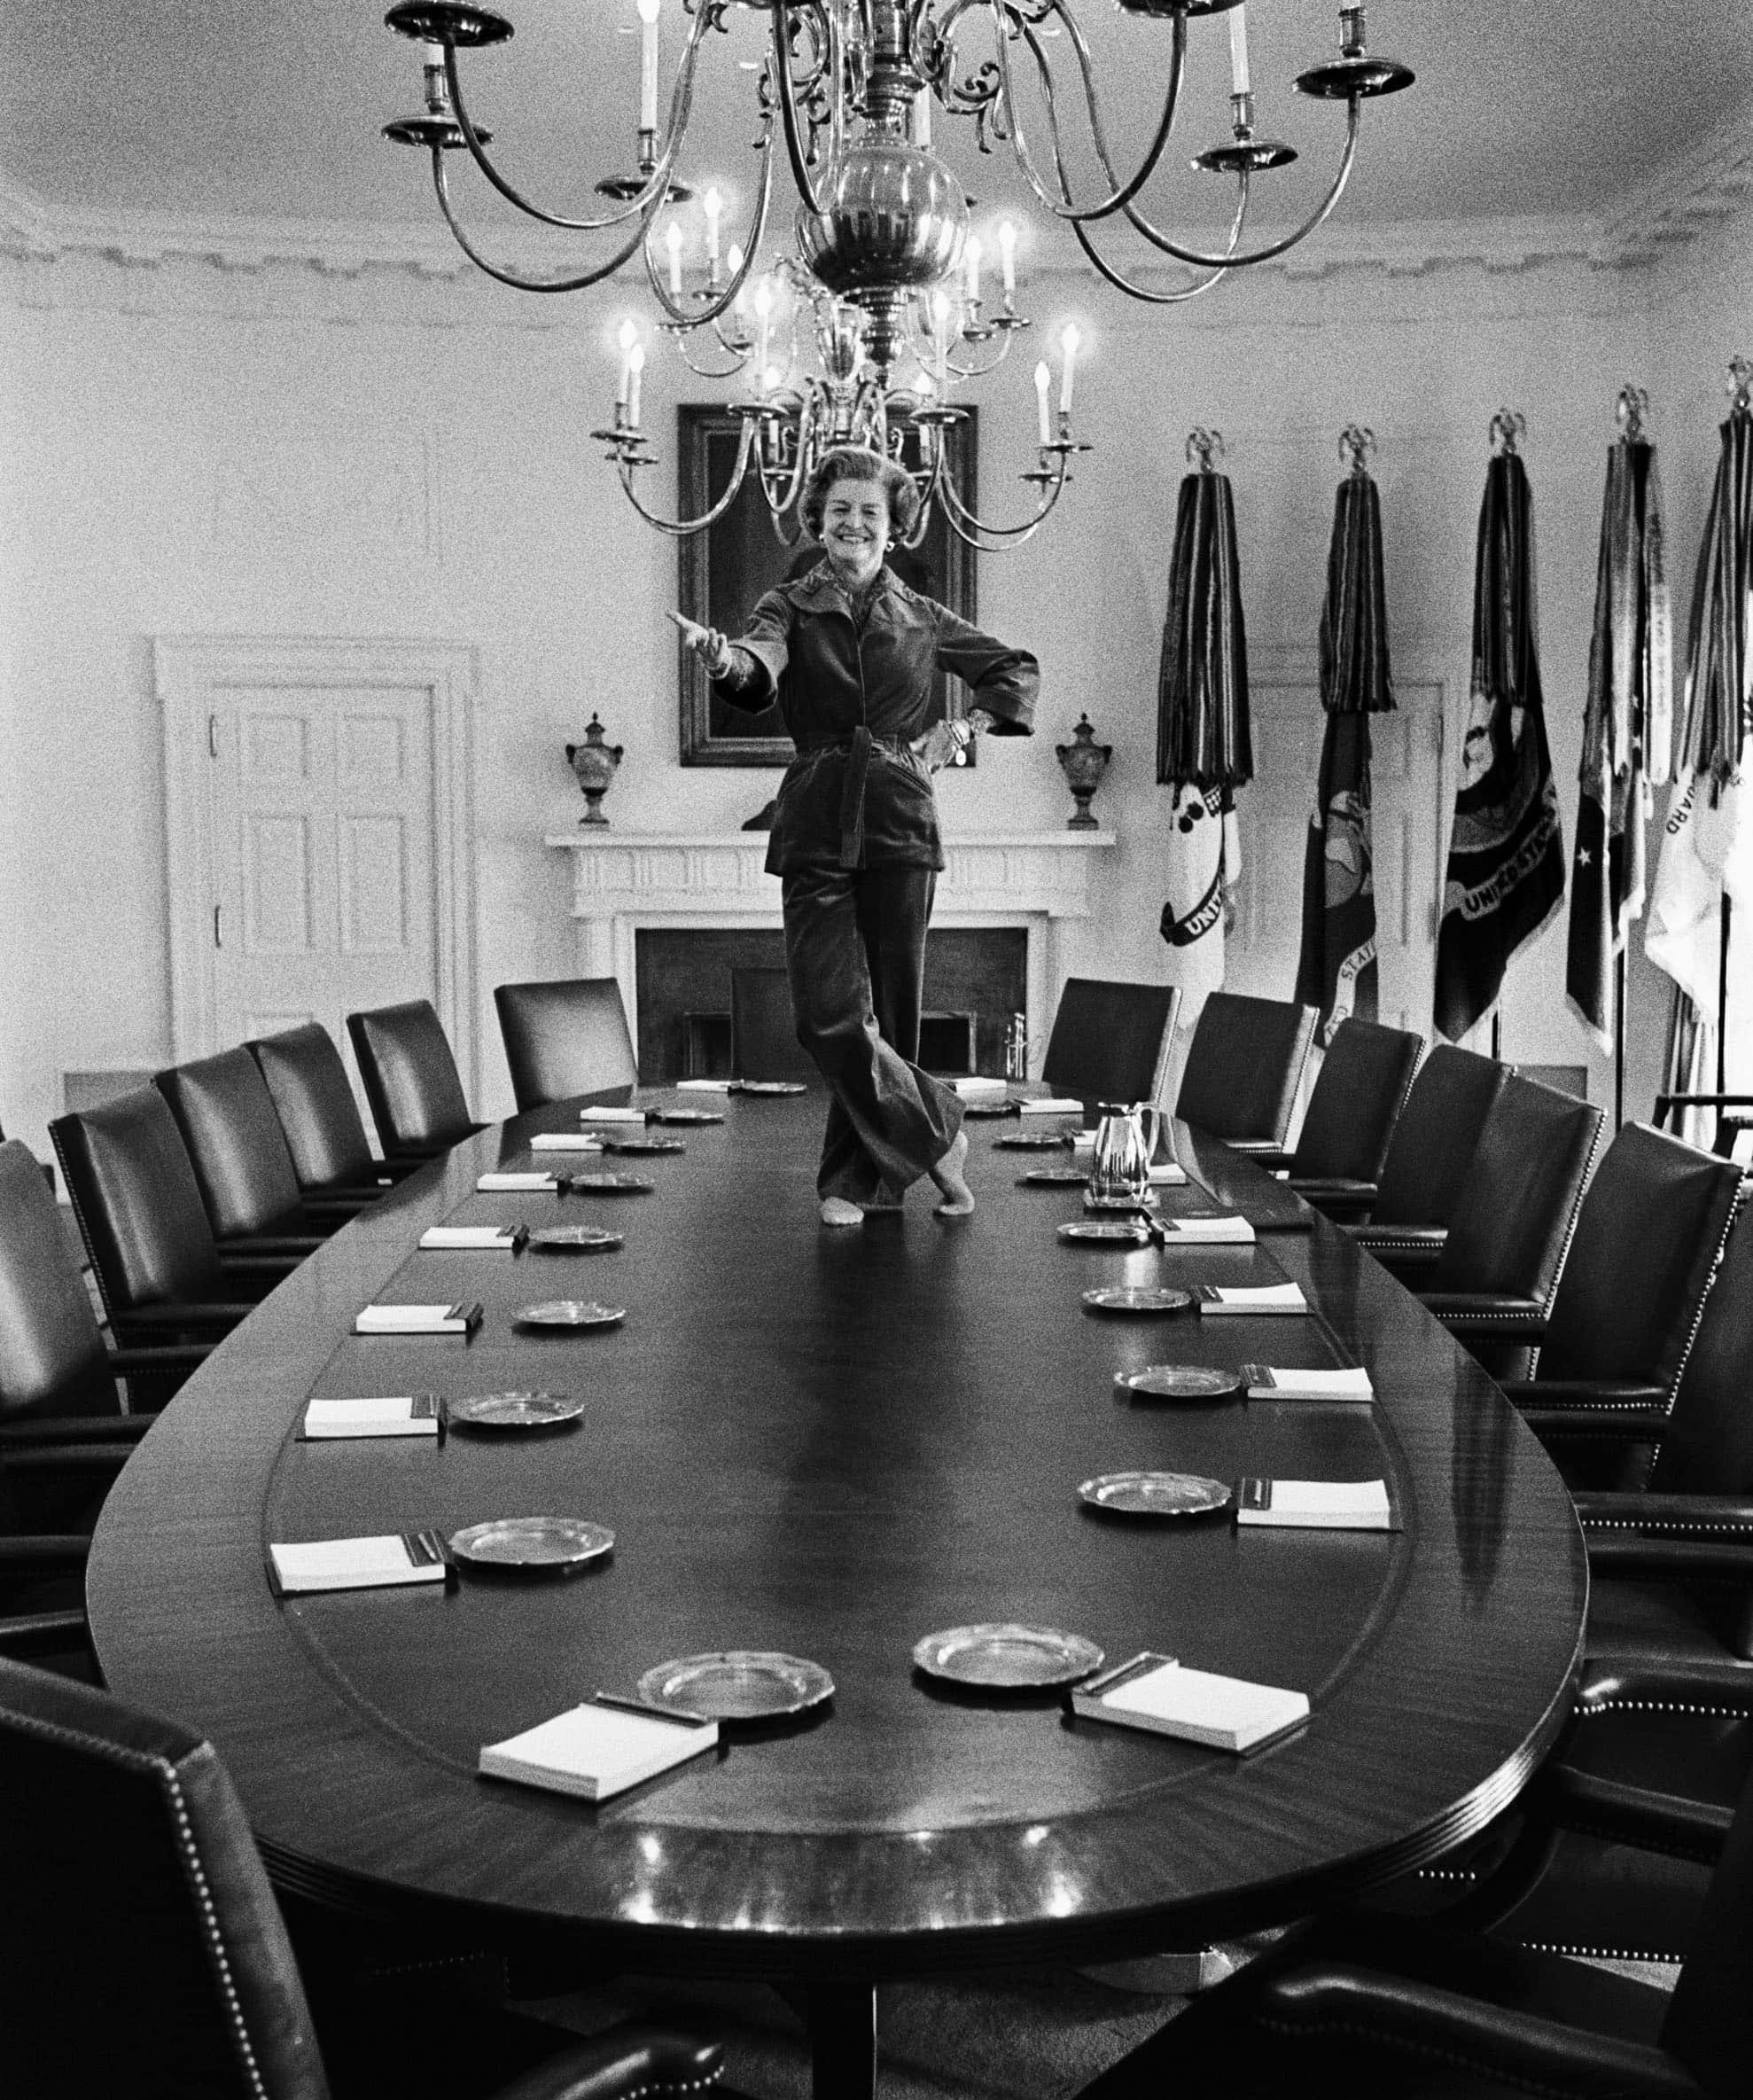 The Real Betty Ford on The Cabinet Room Table (Kennerly)